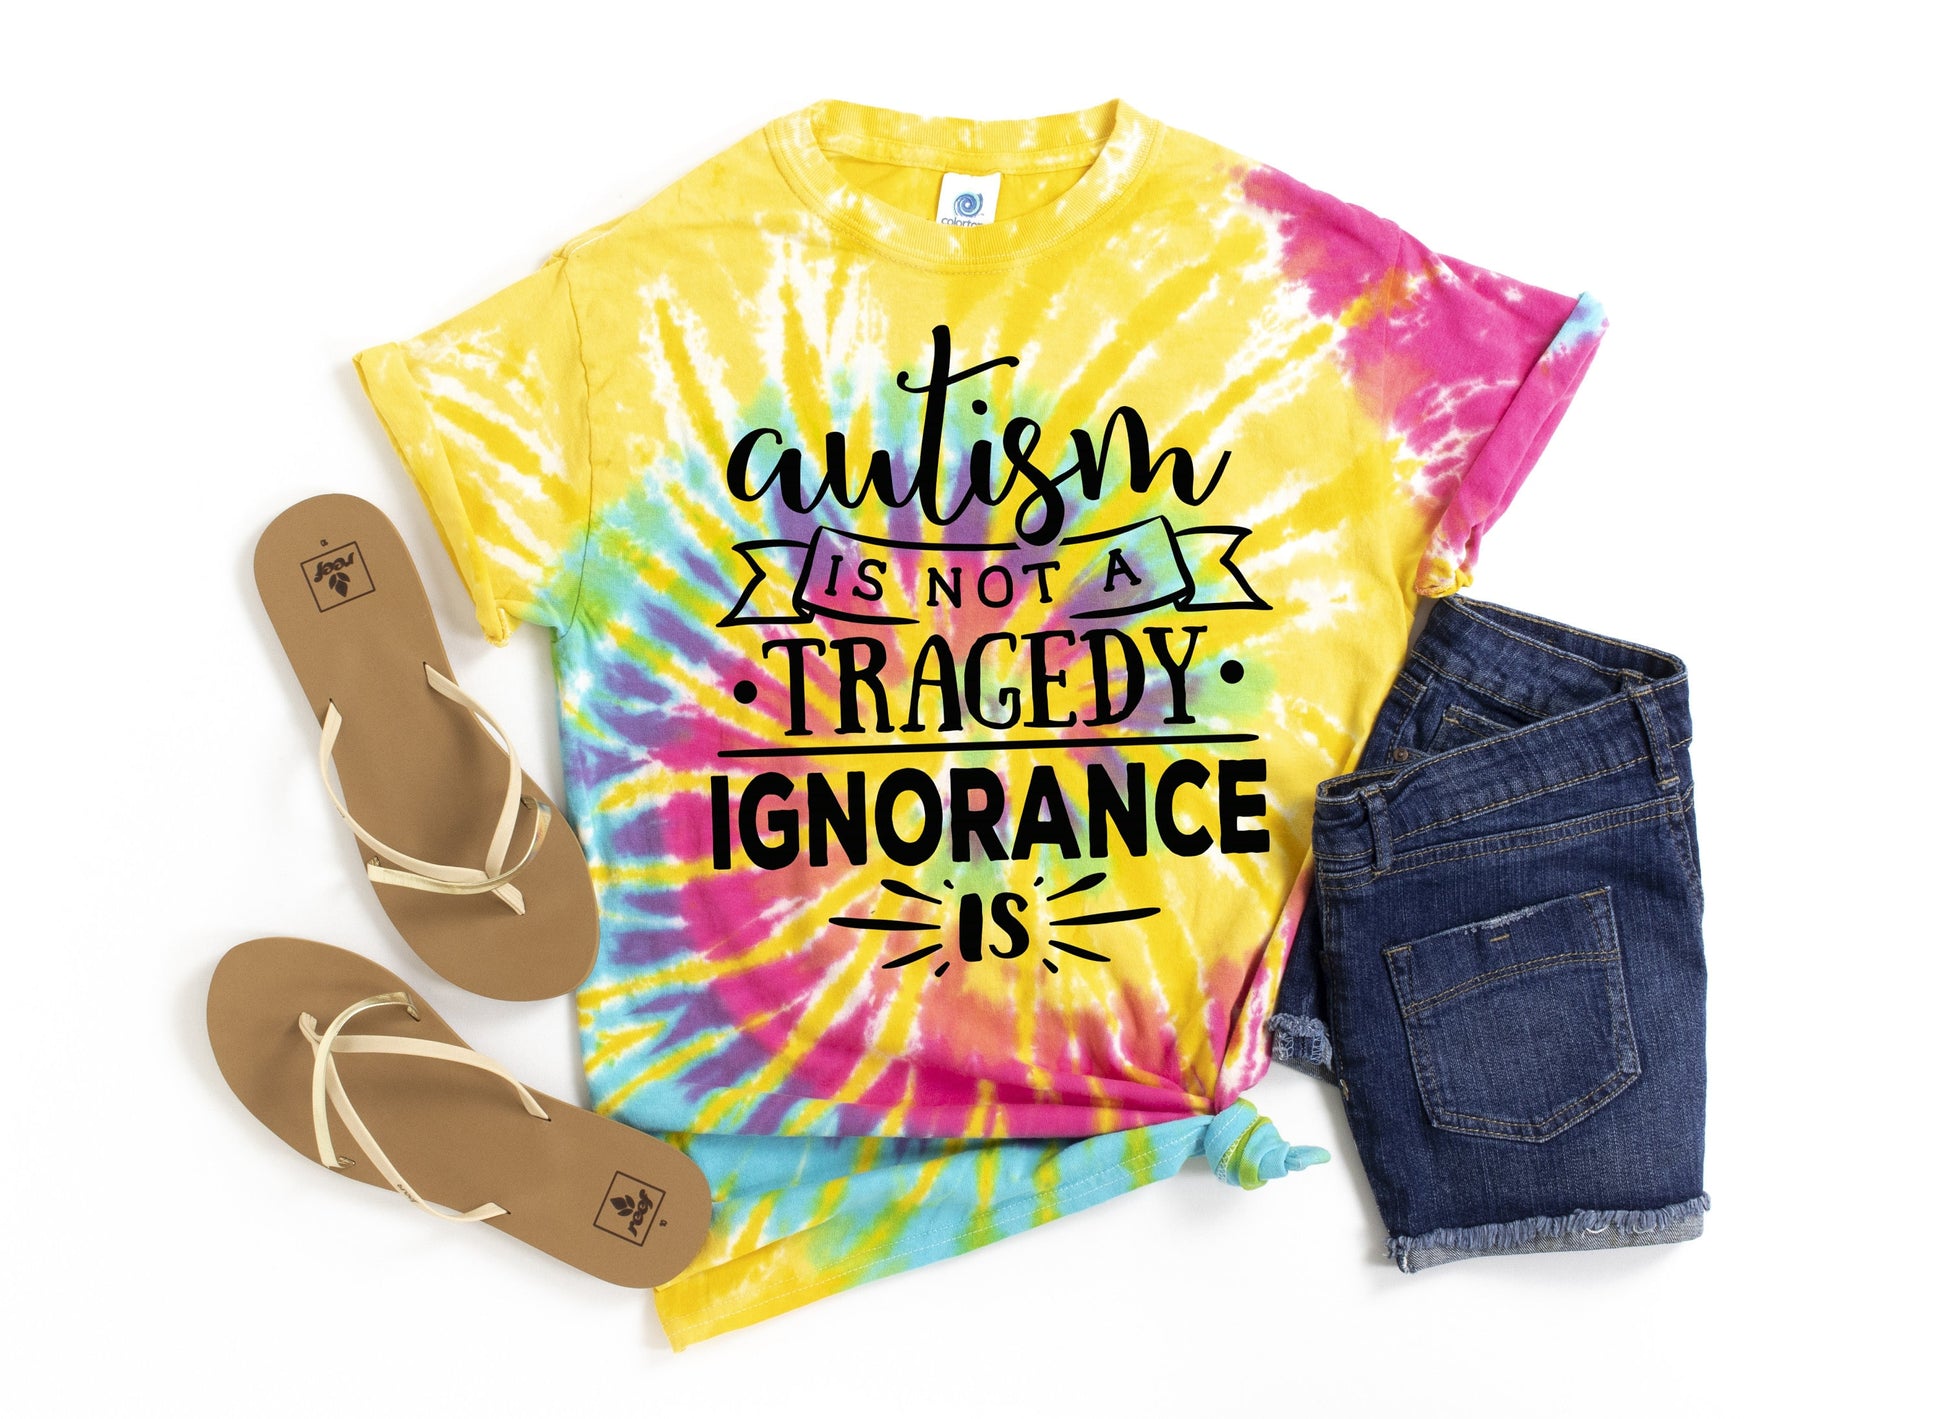 Autism is Not a Tragedy Ignorance Is Tie Dye unisex t-shirt - Kids and Adults Sizes - Autism Awareness Shirt - Autism Support - Autism Shirt